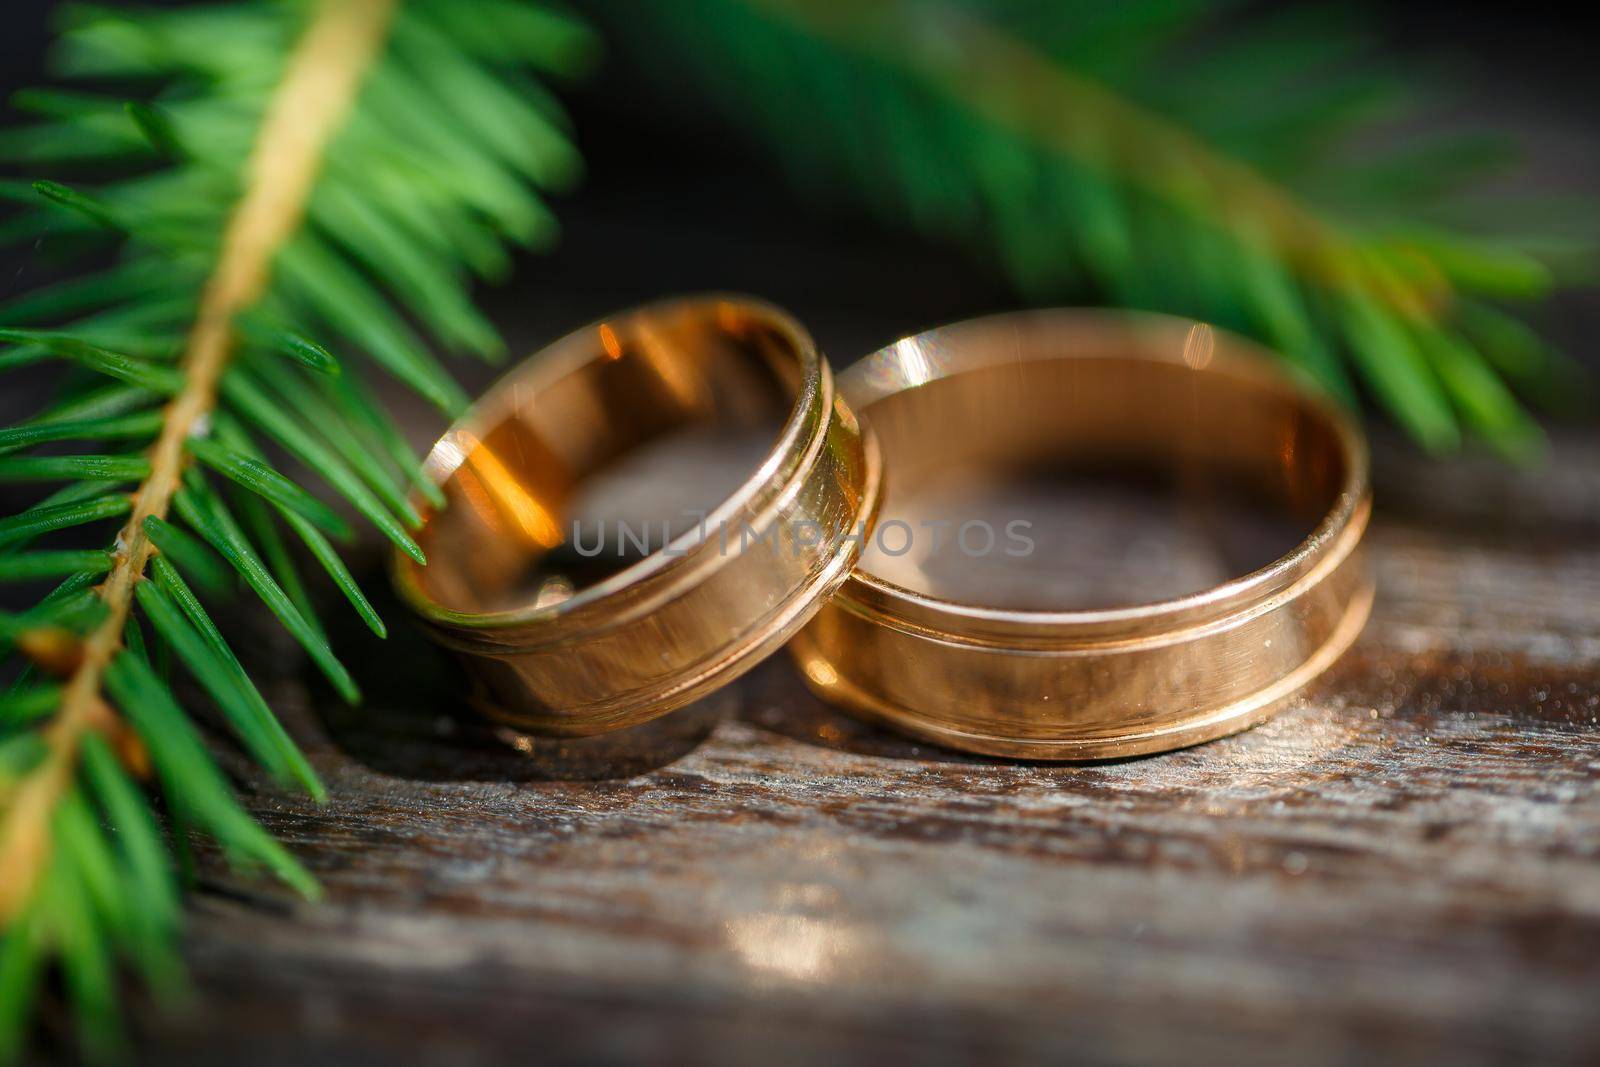 Gold wedding rings for newlyweds on wedding day